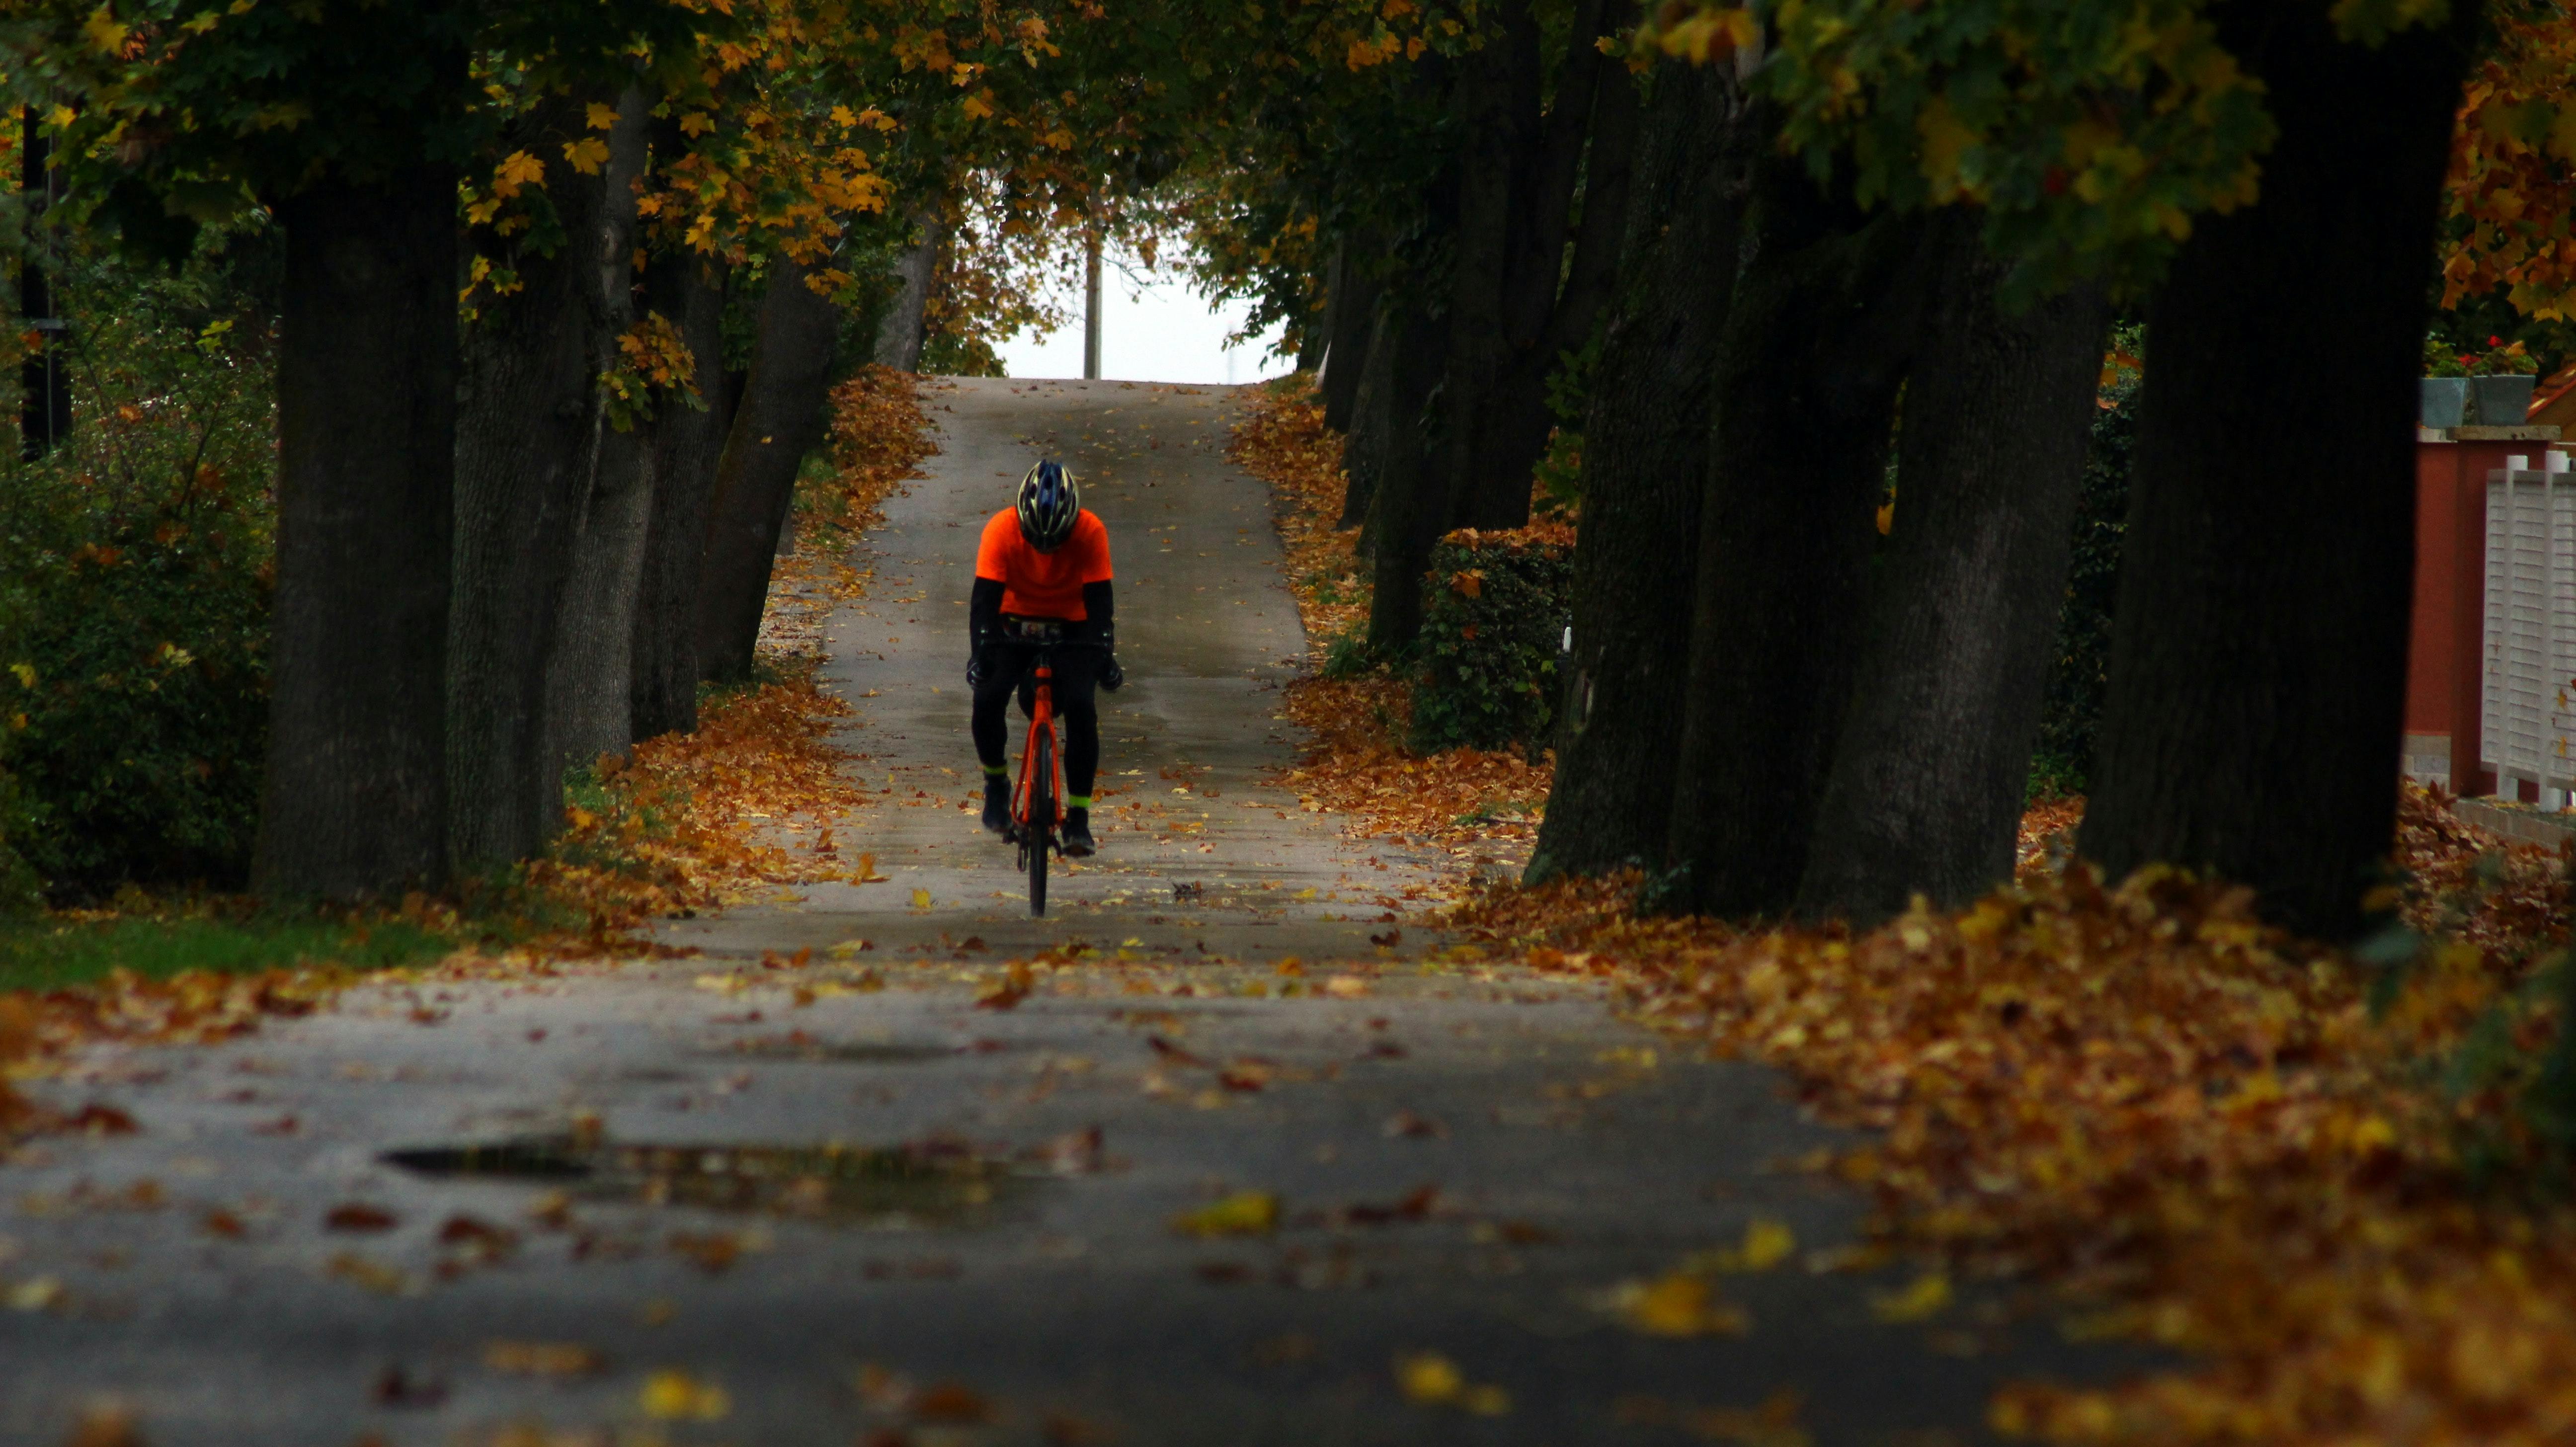 A man cycles on the pavement. The road or path is covered in fallen, orange leaves. 